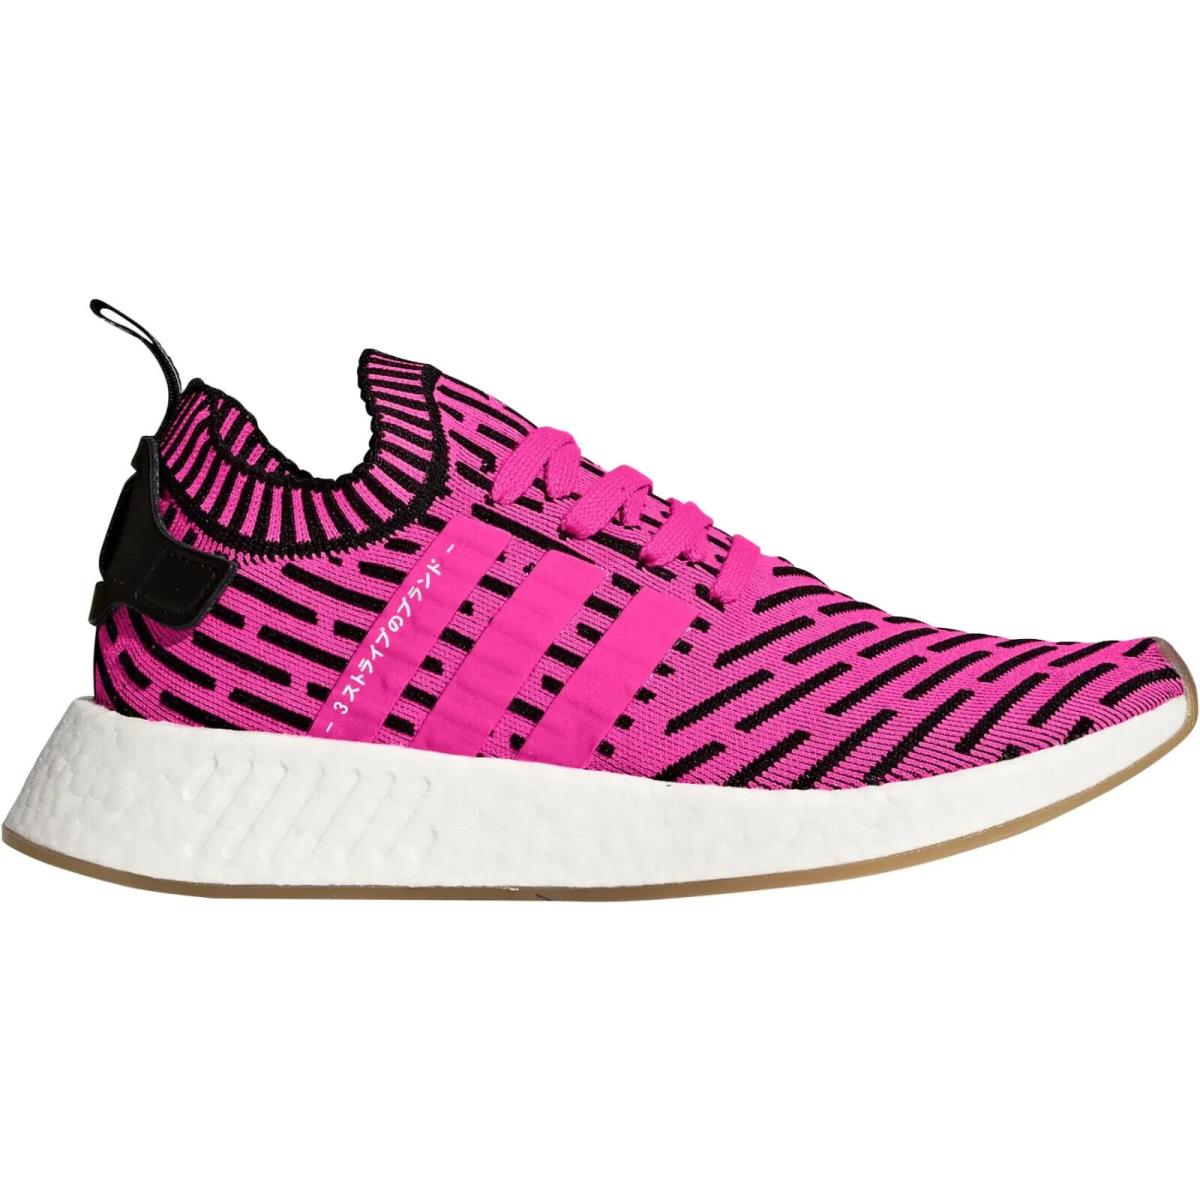 Adidas Nmd R2 PK Primeknit Pink Black Mens Size 10.5 Running Sneakers BY9697